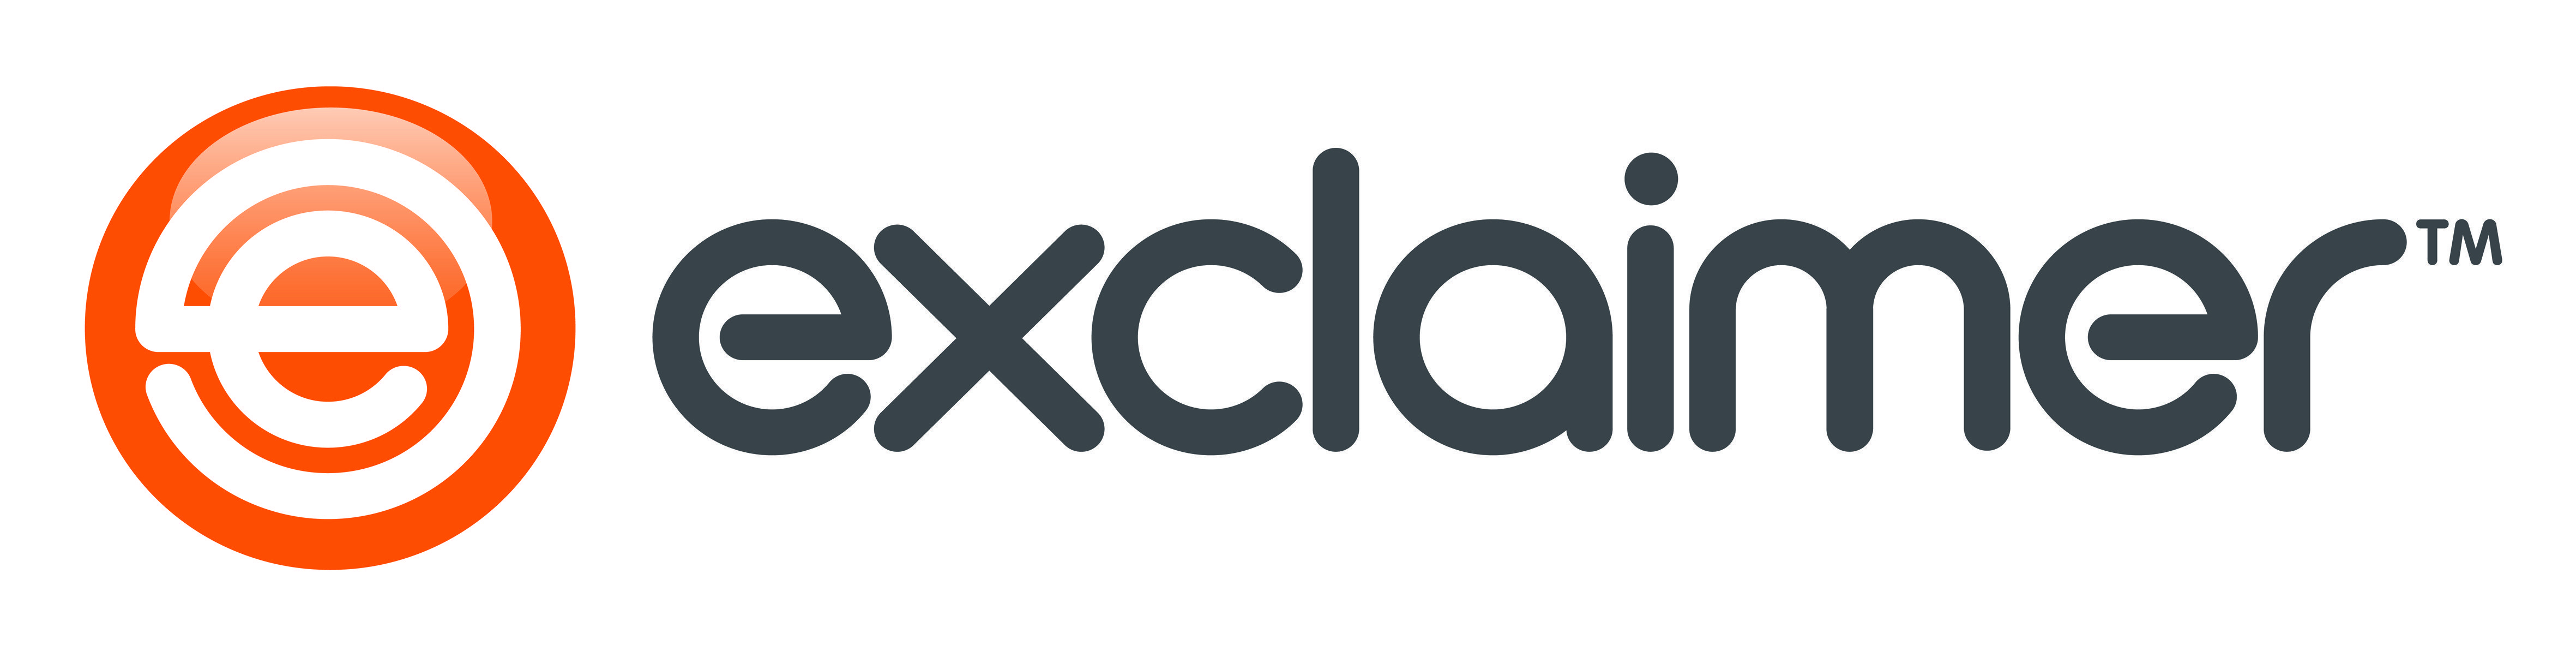 Exclaimer Signatures for Exchange